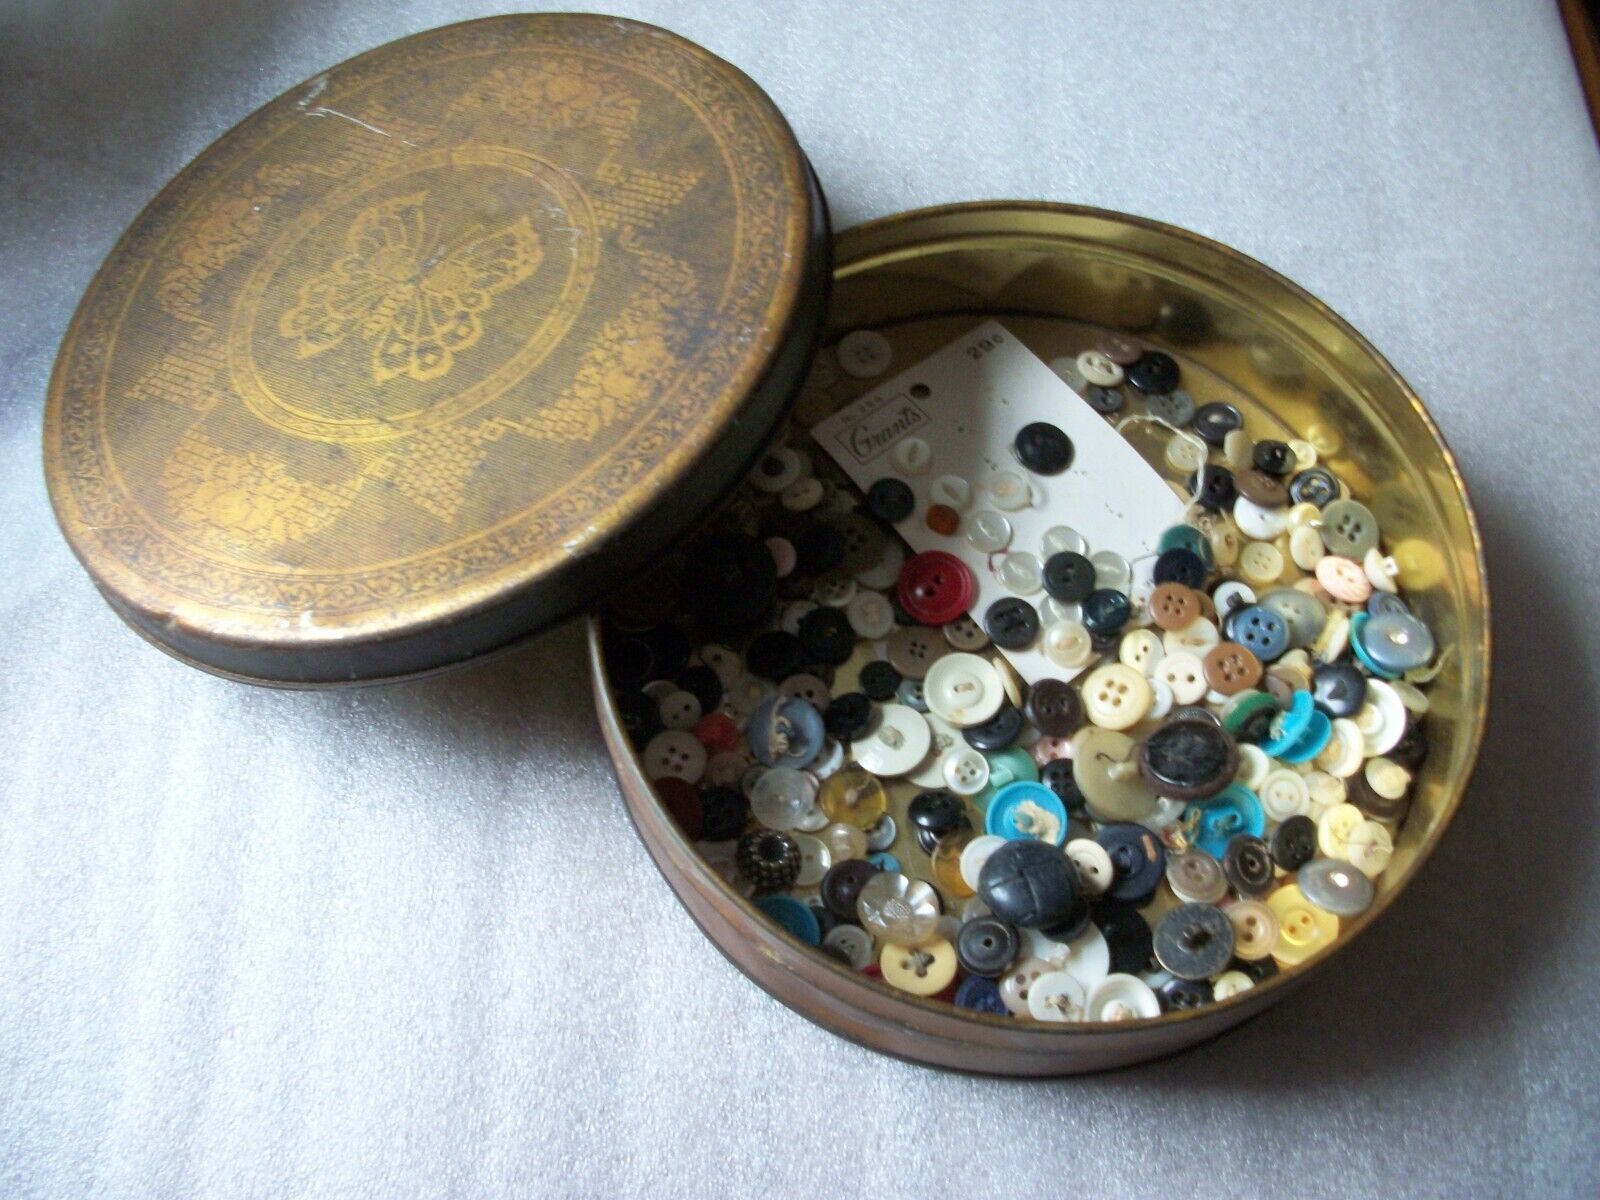 Vintage 1940's-1950's Buttons - Variety of Sizes & Colors in Vintage 1940's Tin